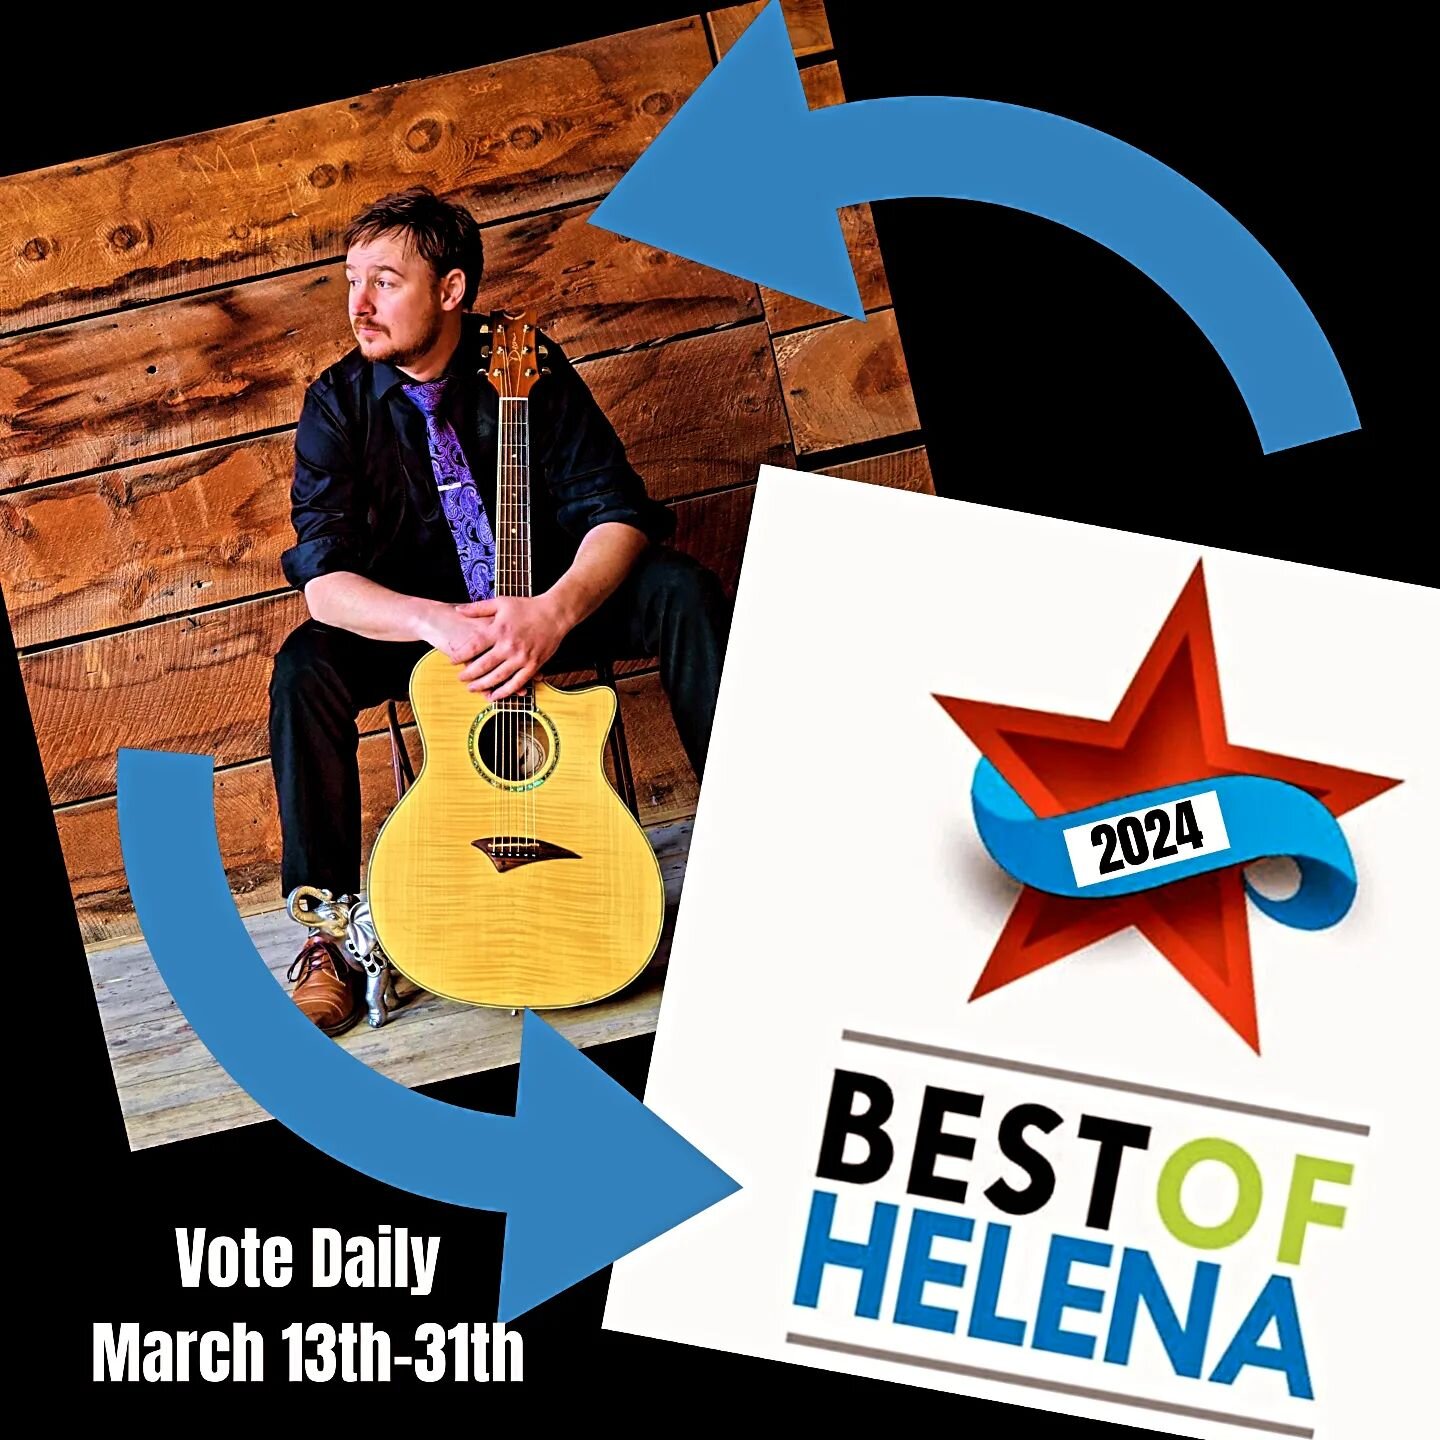 It's that time of year again folks! Dan Henry 
has made it into the best of Helena list (Local Band)  and needs your help to win it this year. 

Follow the link below to start voting!

You can vote once each day from March 13th to the 31st. 

https:/